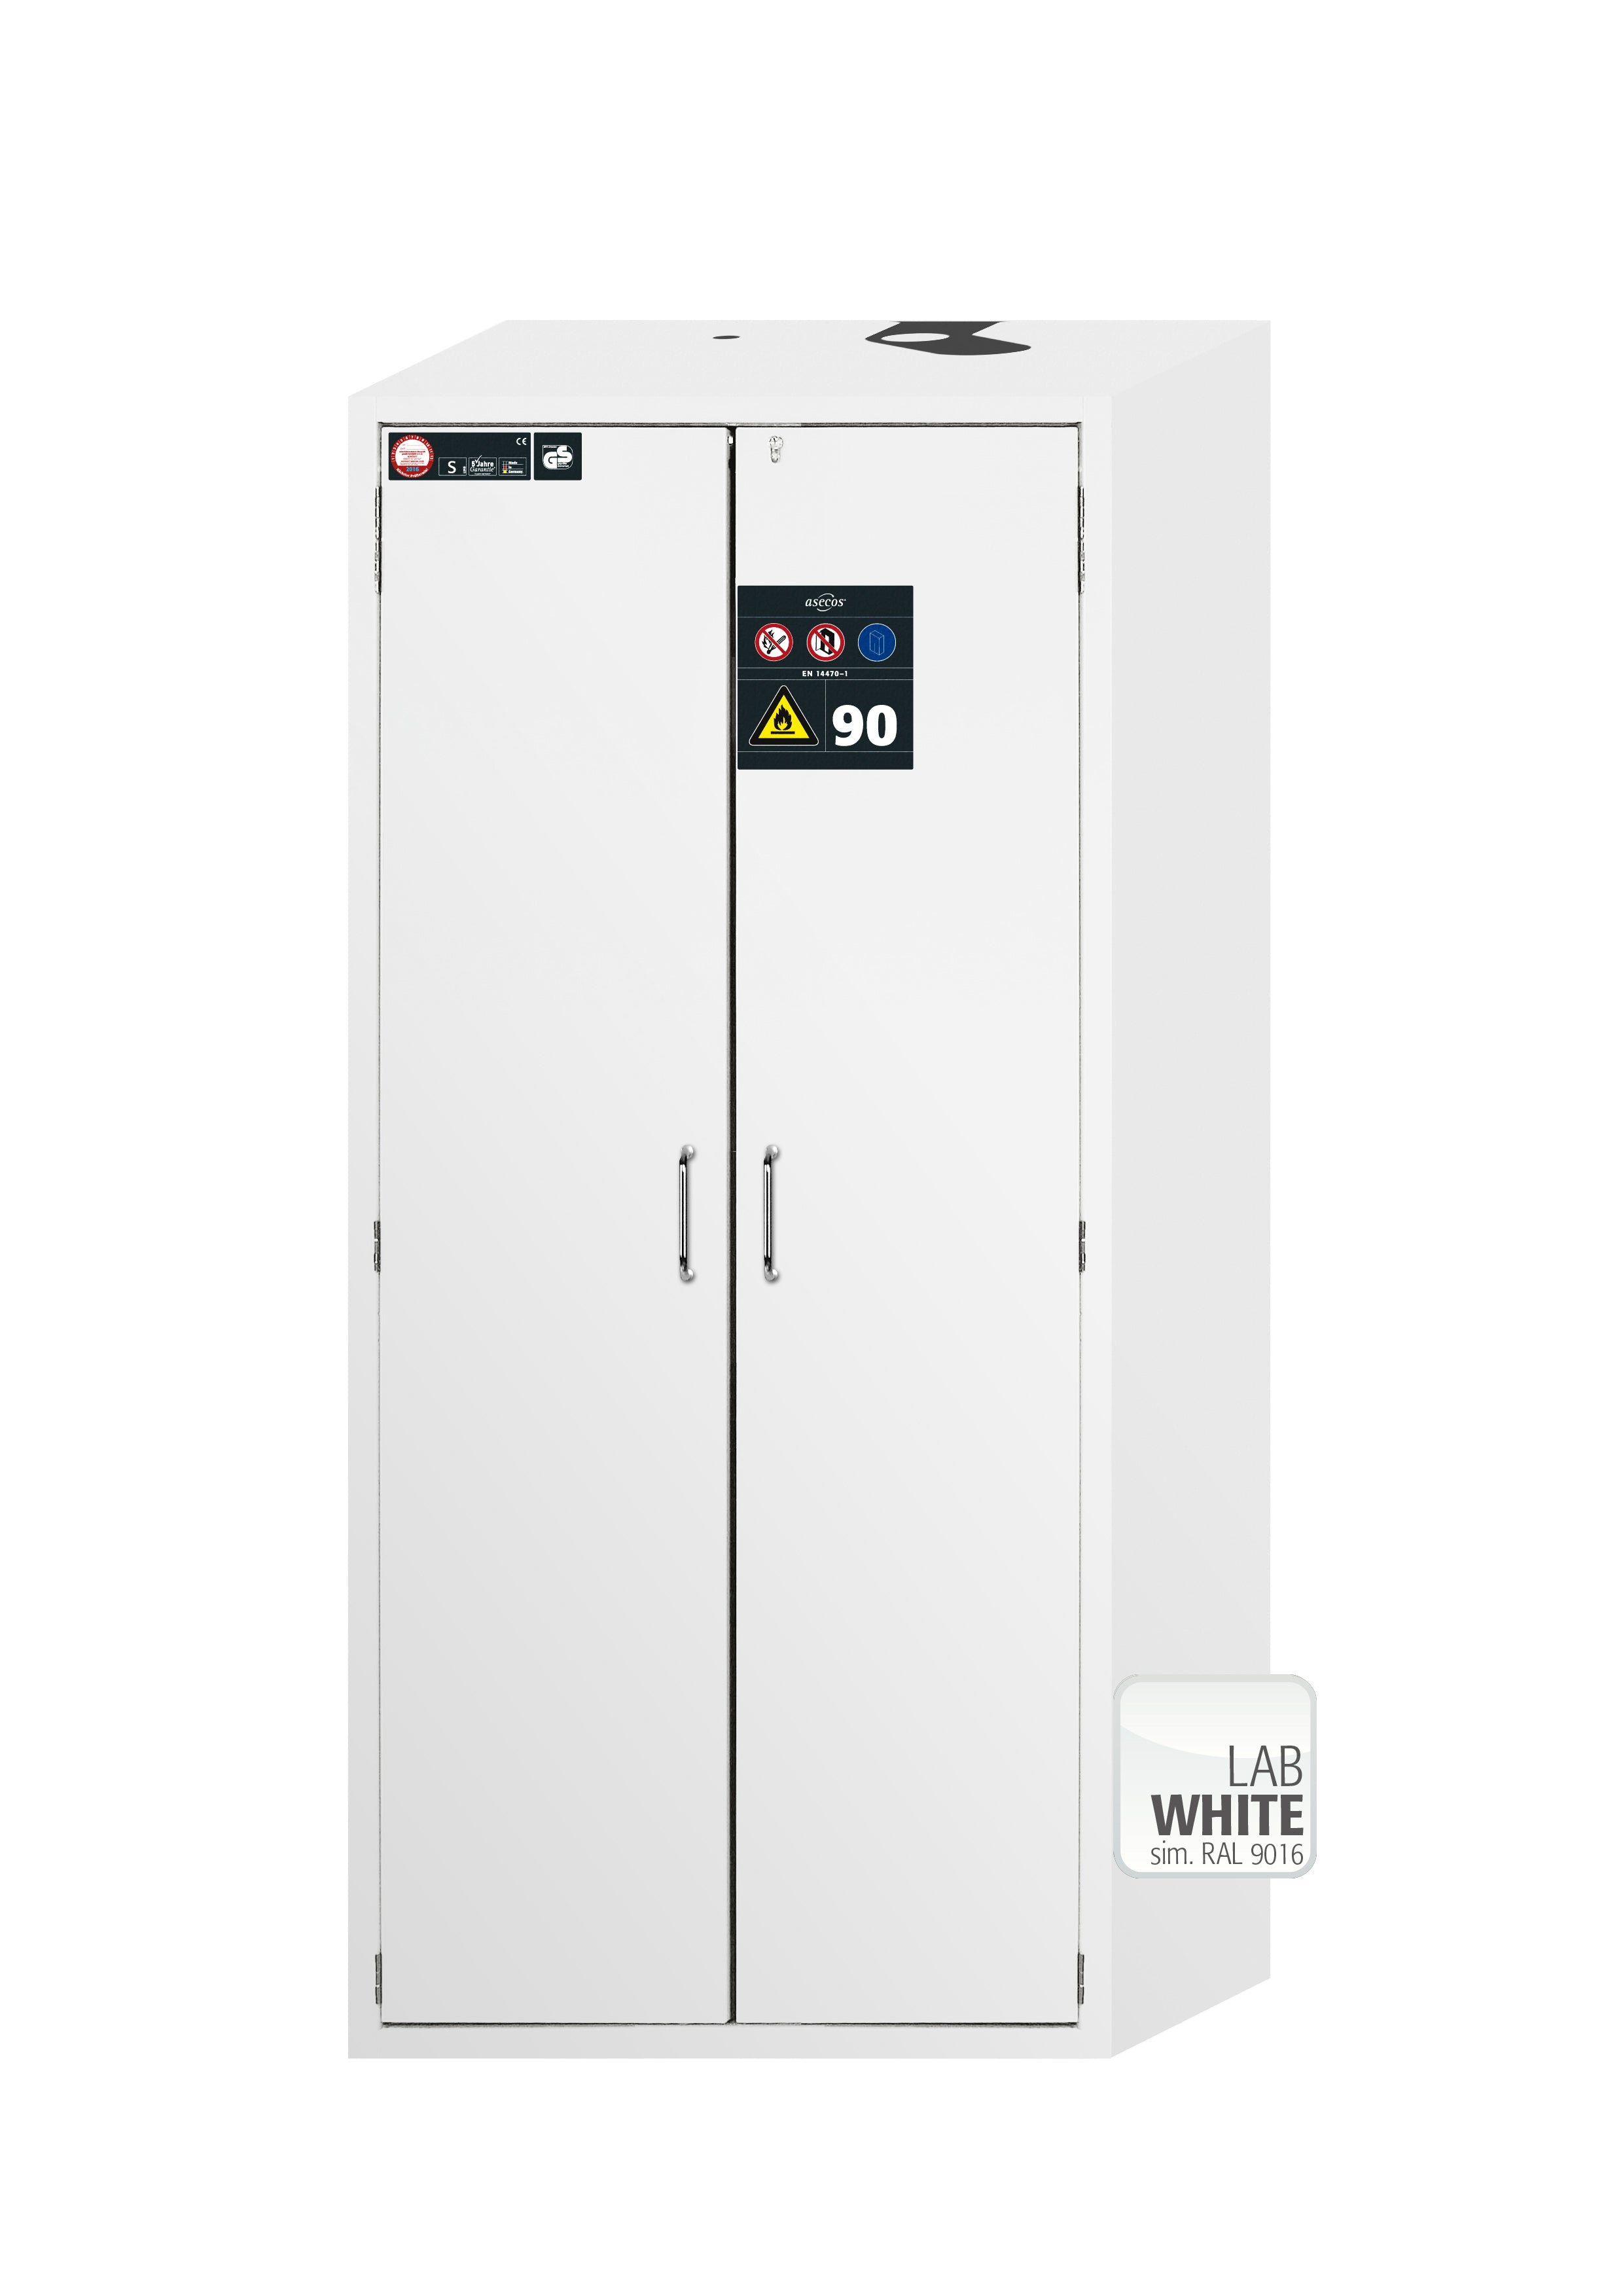 Type 90 safety cabinet S-CLASSIC-90 model S90.196.090.WDAS in laboratory white (similar to RAL 9016) with 6x standard pull-out tray (stainless steel 1.4301)